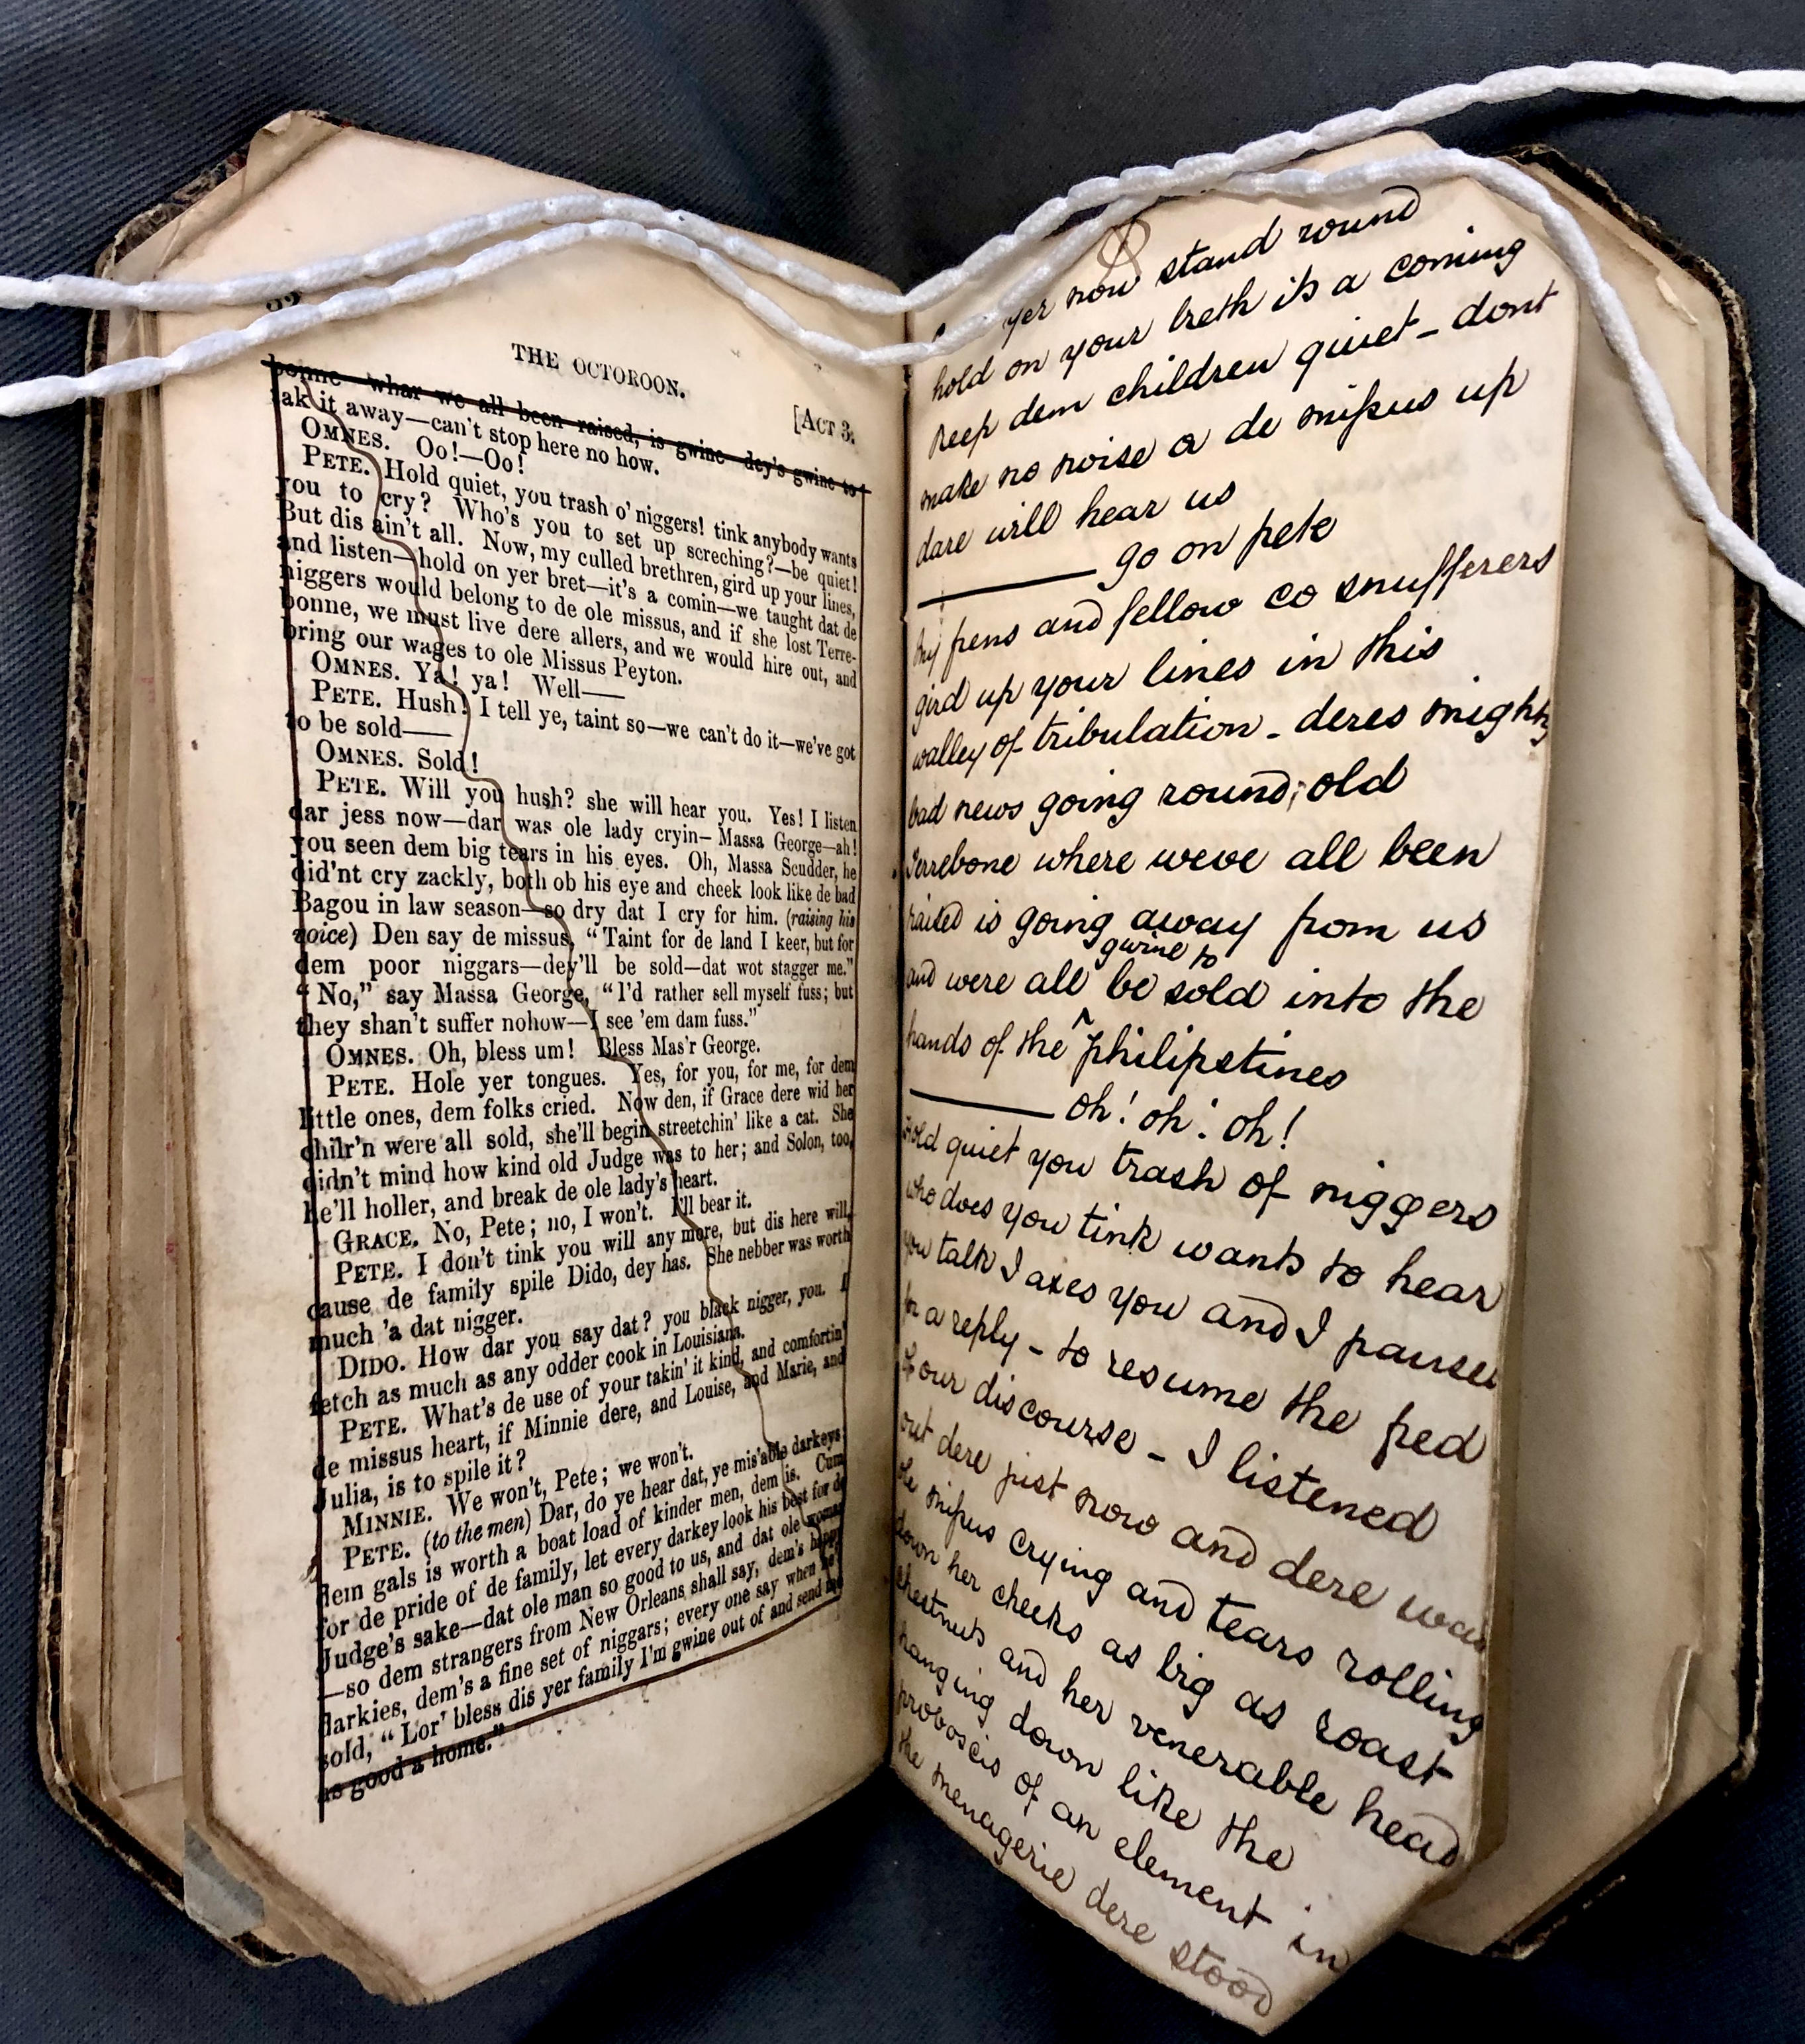 Photograph of the play text for Boucicault's play 'The Octoroon', from the Pettingell collection. The printed text is crossed out and handwritten revisions are included on the next page.